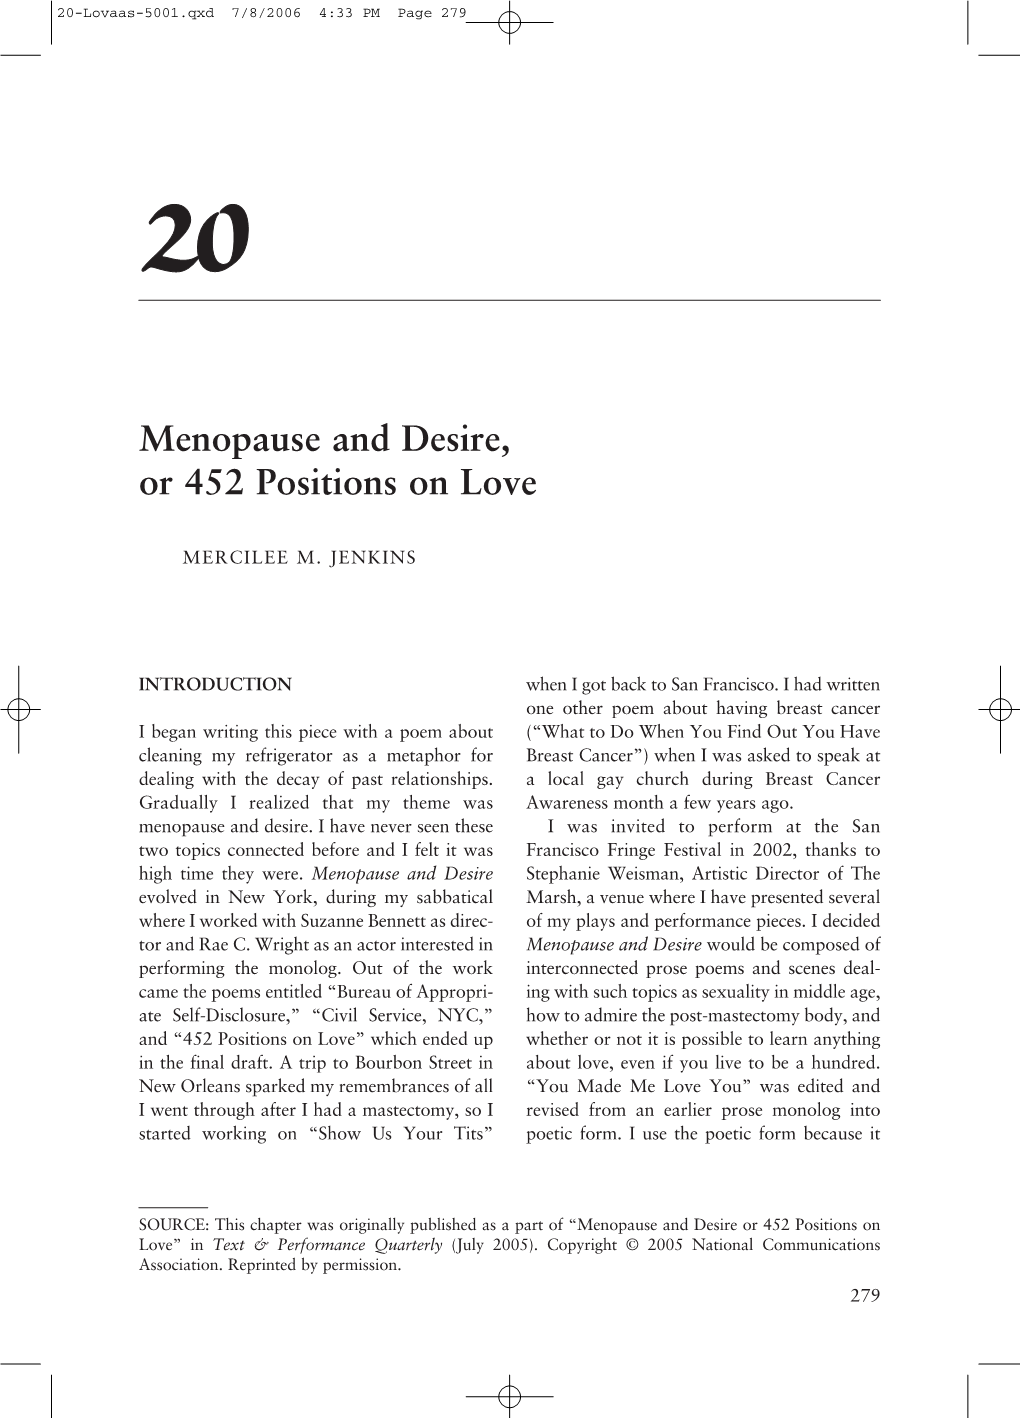 Chapter 20- Menopause and Desire, Or 452 Positions on Love